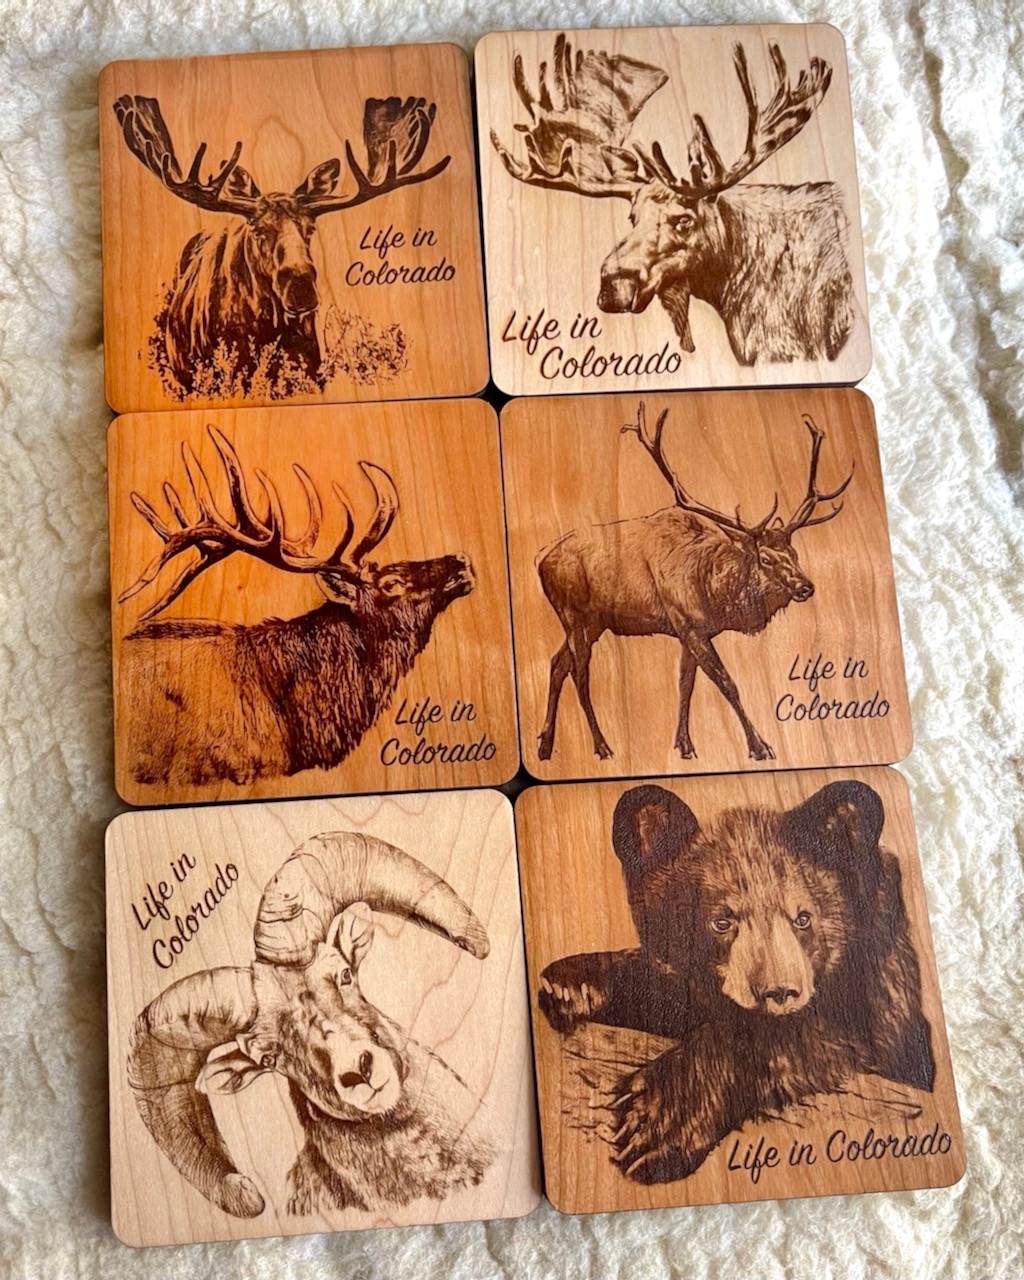 Pet portraits engraved on solid cherry or maple wood